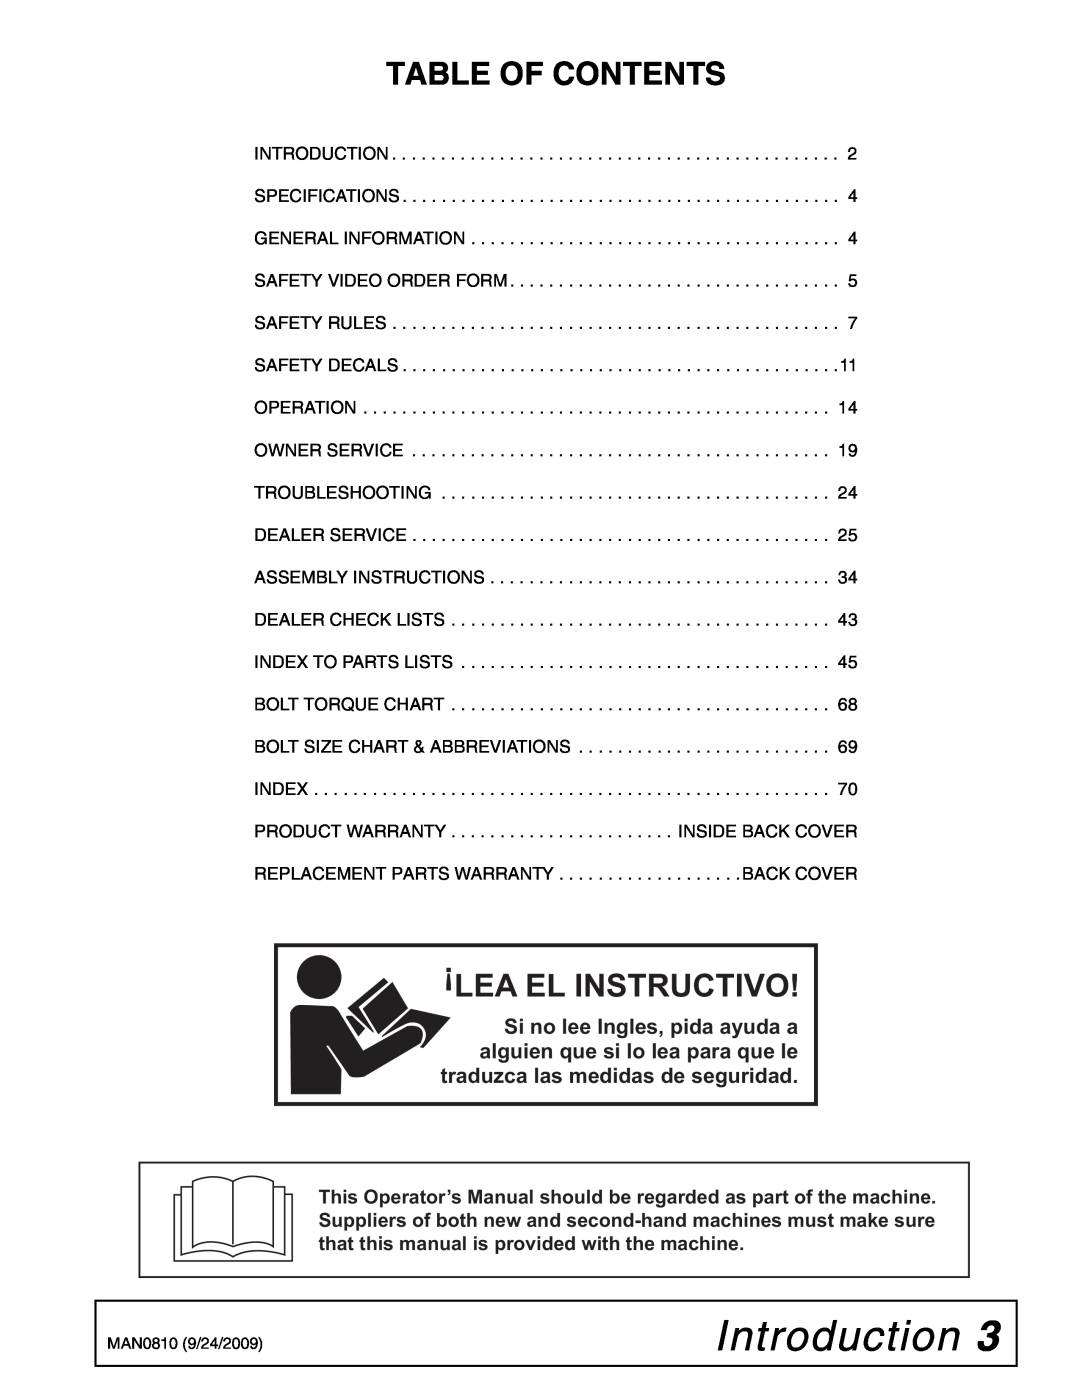 Woods Equipment BW15LH manual Introduction, Table Of Contents, Lea El Instructivo 